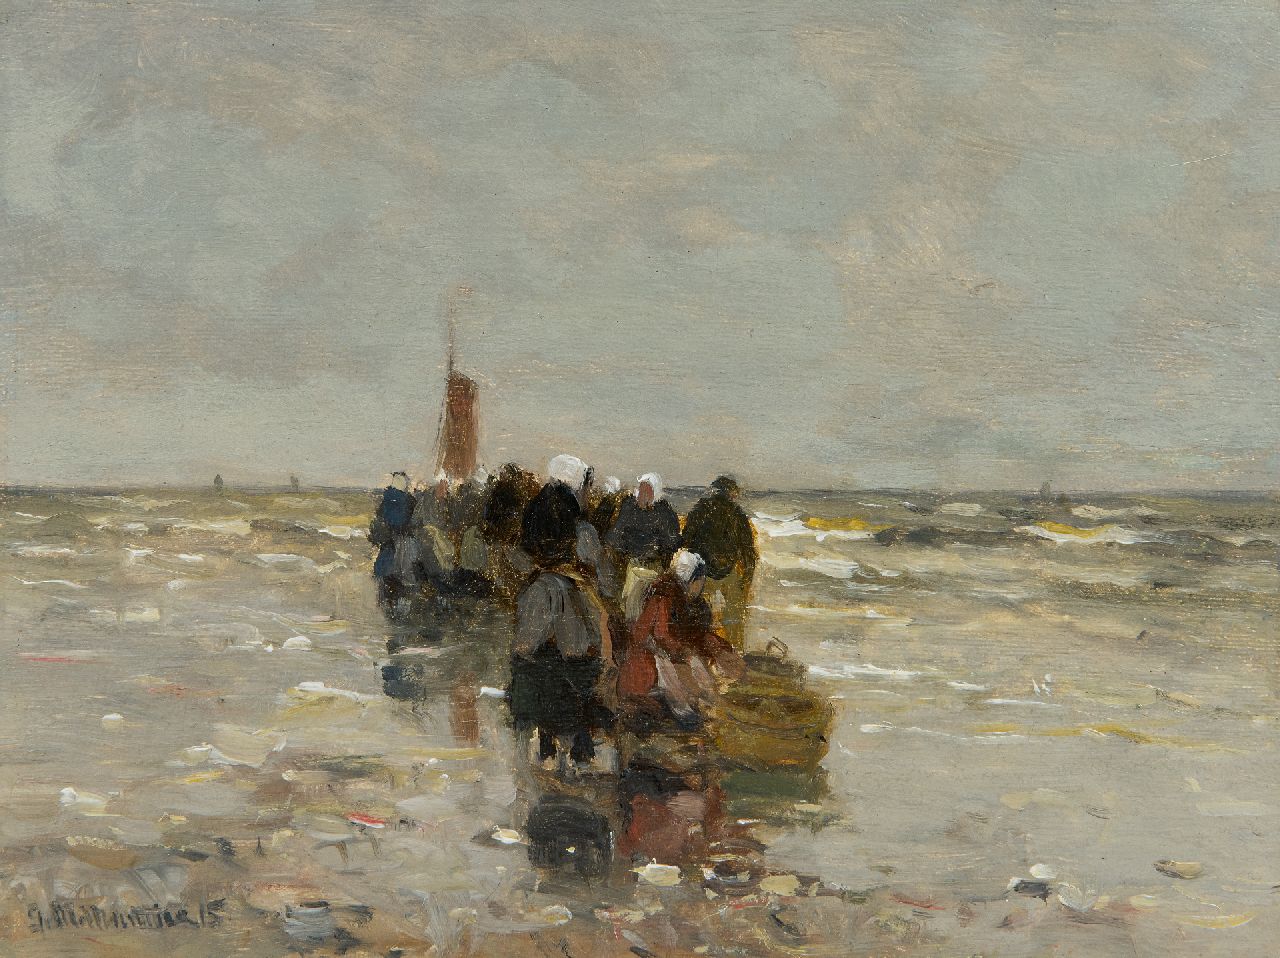 Munthe G.A.L.  | Gerhard Arij Ludwig 'Morgenstjerne' Munthe, Fishmongers waiting on the beach of Katwijk, oil on panel 16.0 x 21.0 cm, signed l.l. and dated '15